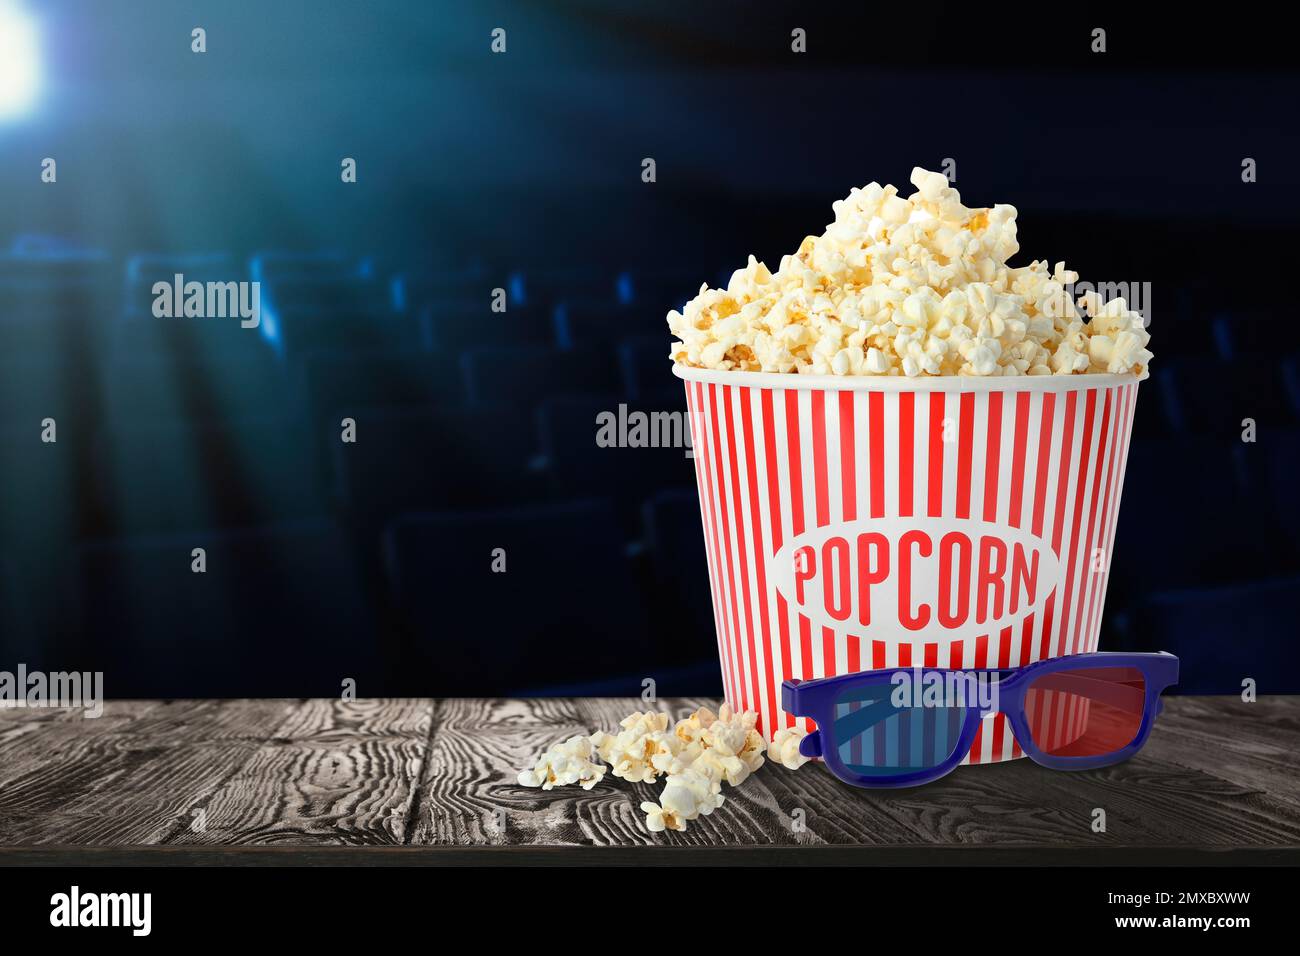 https://c8.alamy.com/comp/2MXBXWW/popcorn-3d-glasses-in-cinema-on-table-and-empty-cinema-hall-space-for-text-2MXBXWW.jpg